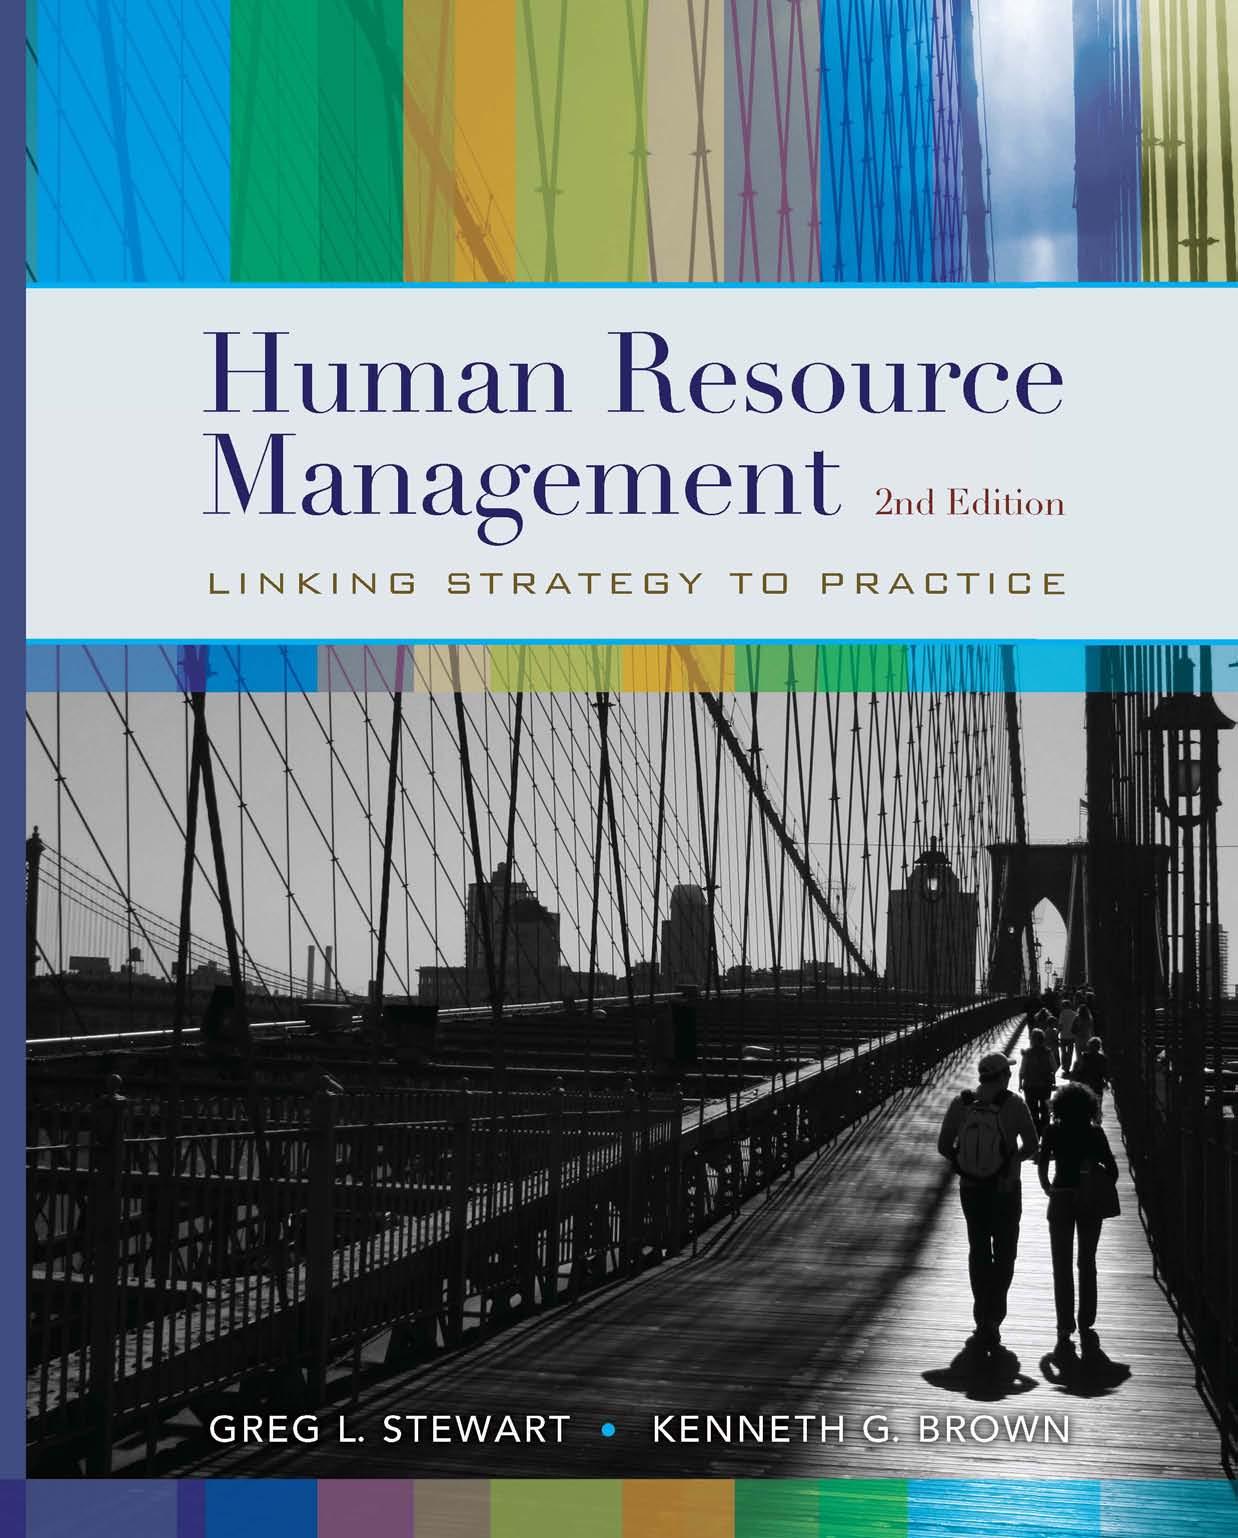 Human Resource Management, Second Edition